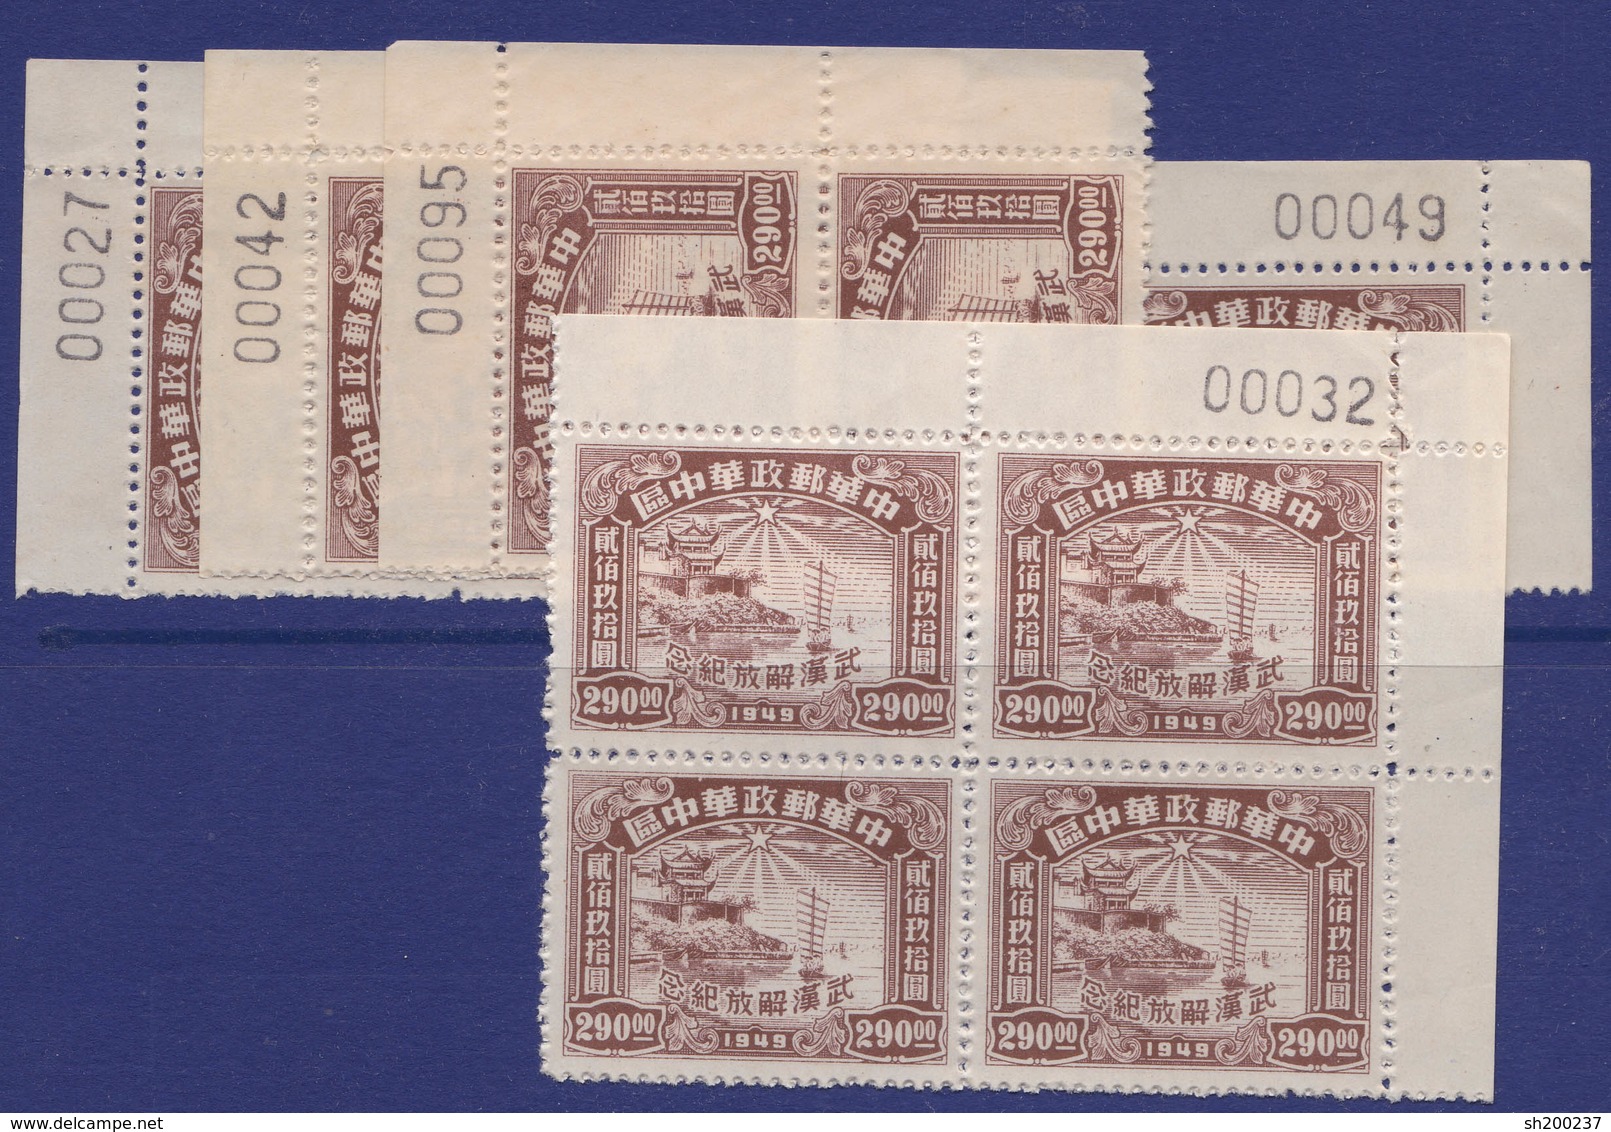 1949 Lib. Of Hankow LCC88 Corner Number - Chine Centrale 1948-49